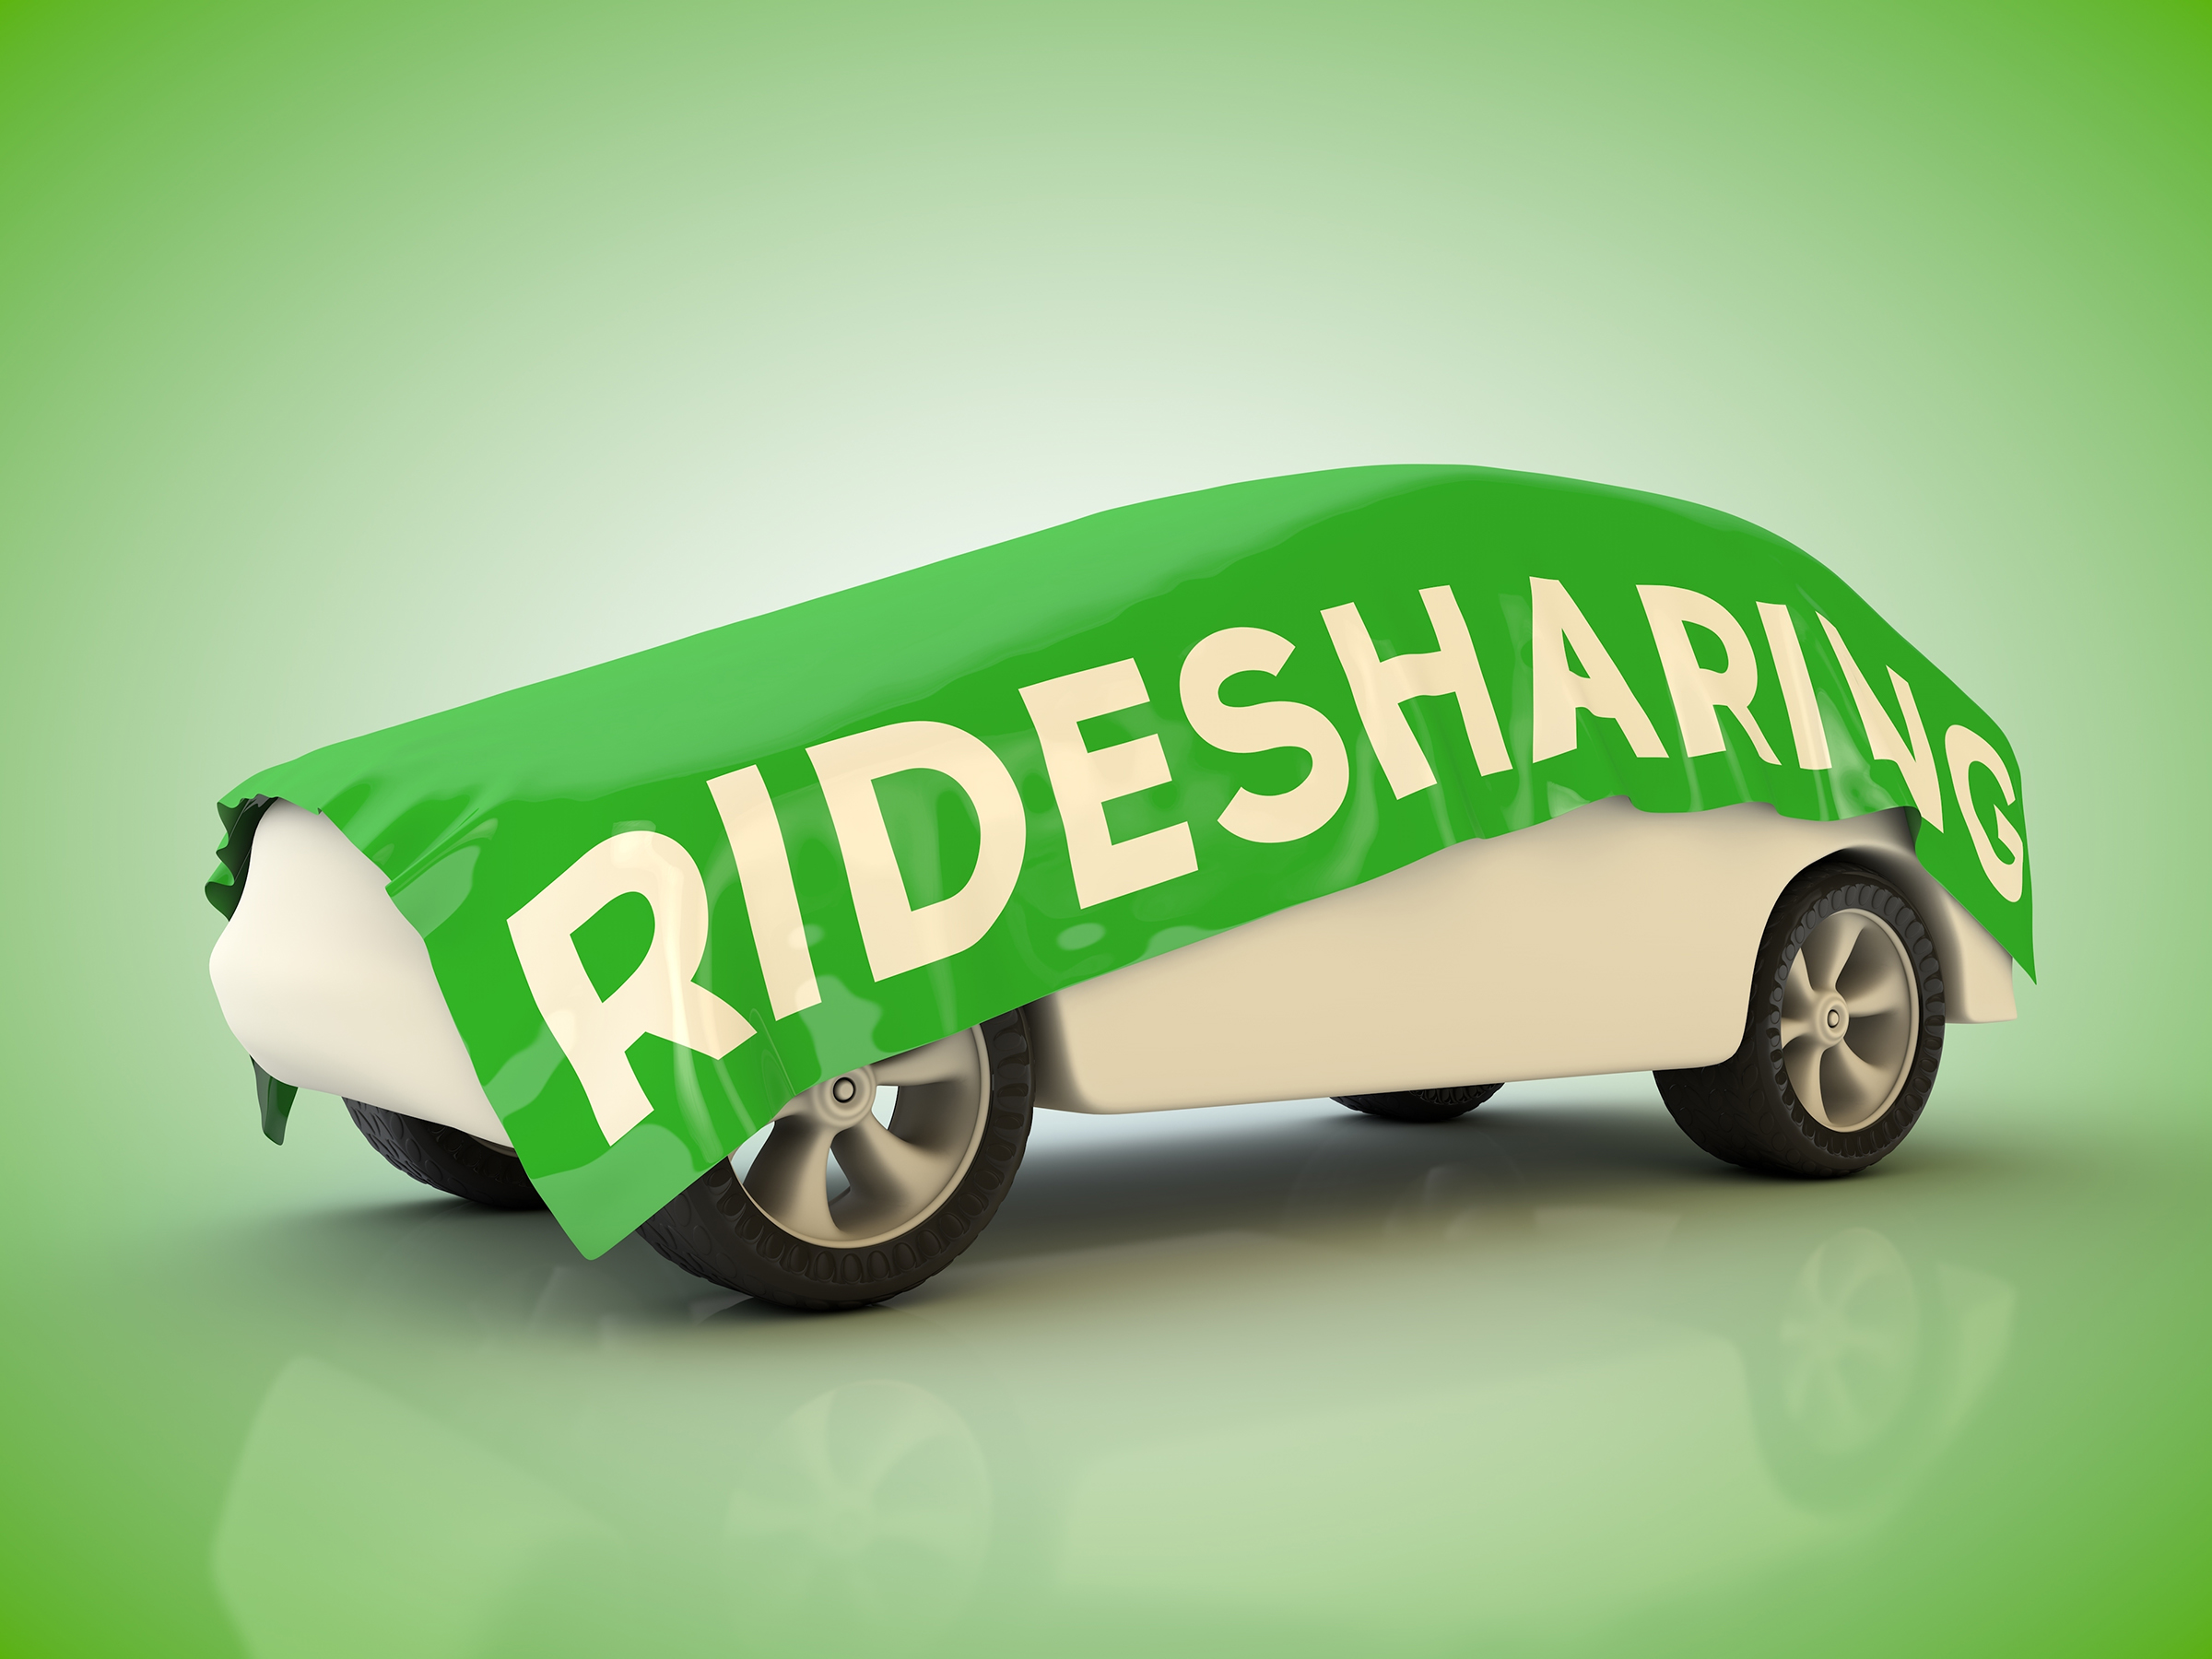 Personal security when ride sharing